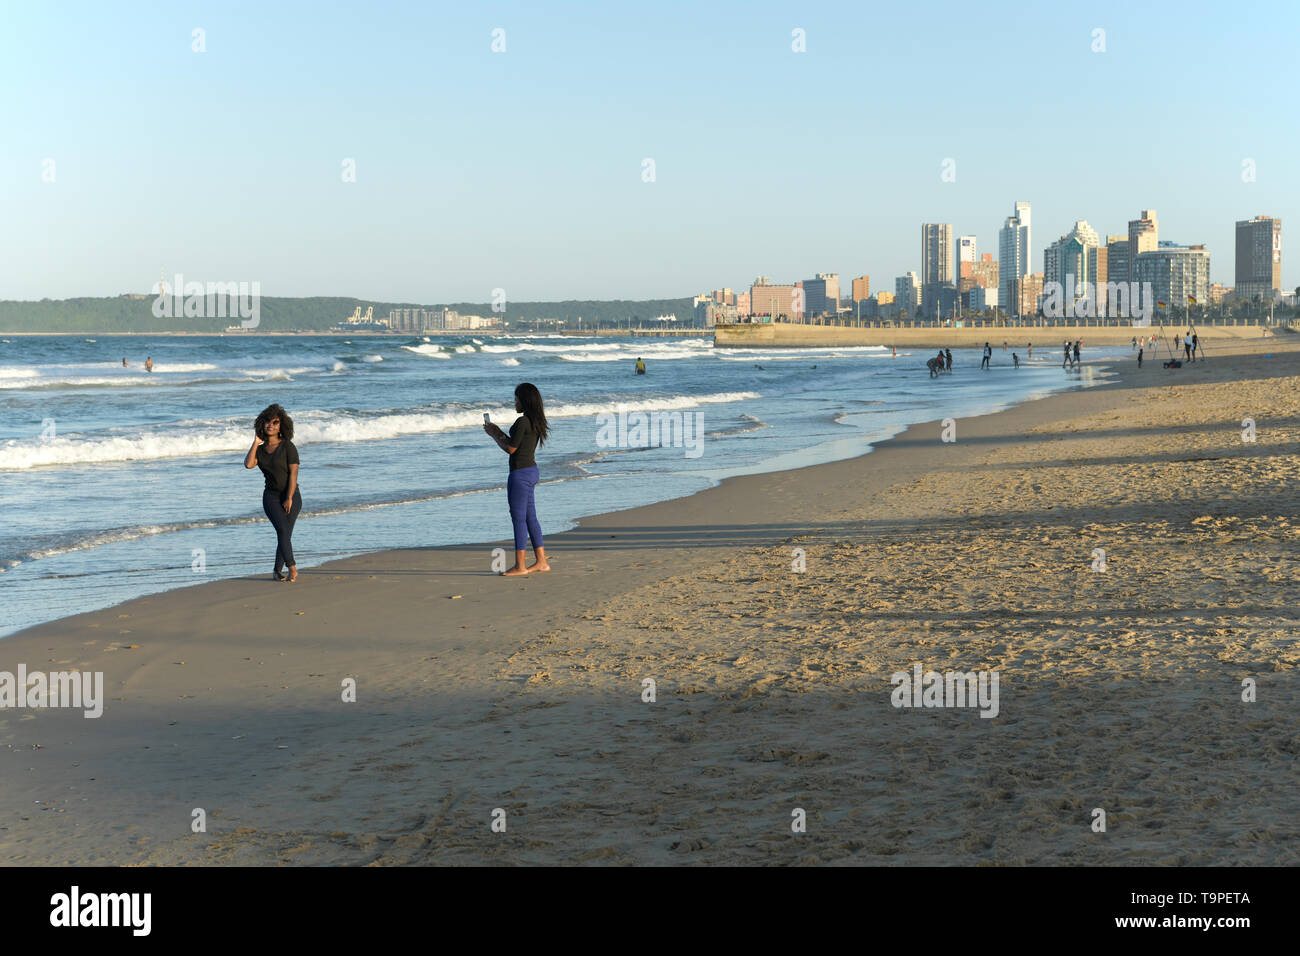 Posing for cell phone photo, two young adult women standing on beach, Durban, KwaZulu-Natal, South Africa, friends, landscape, skyline, city, ethnic Stock Photo